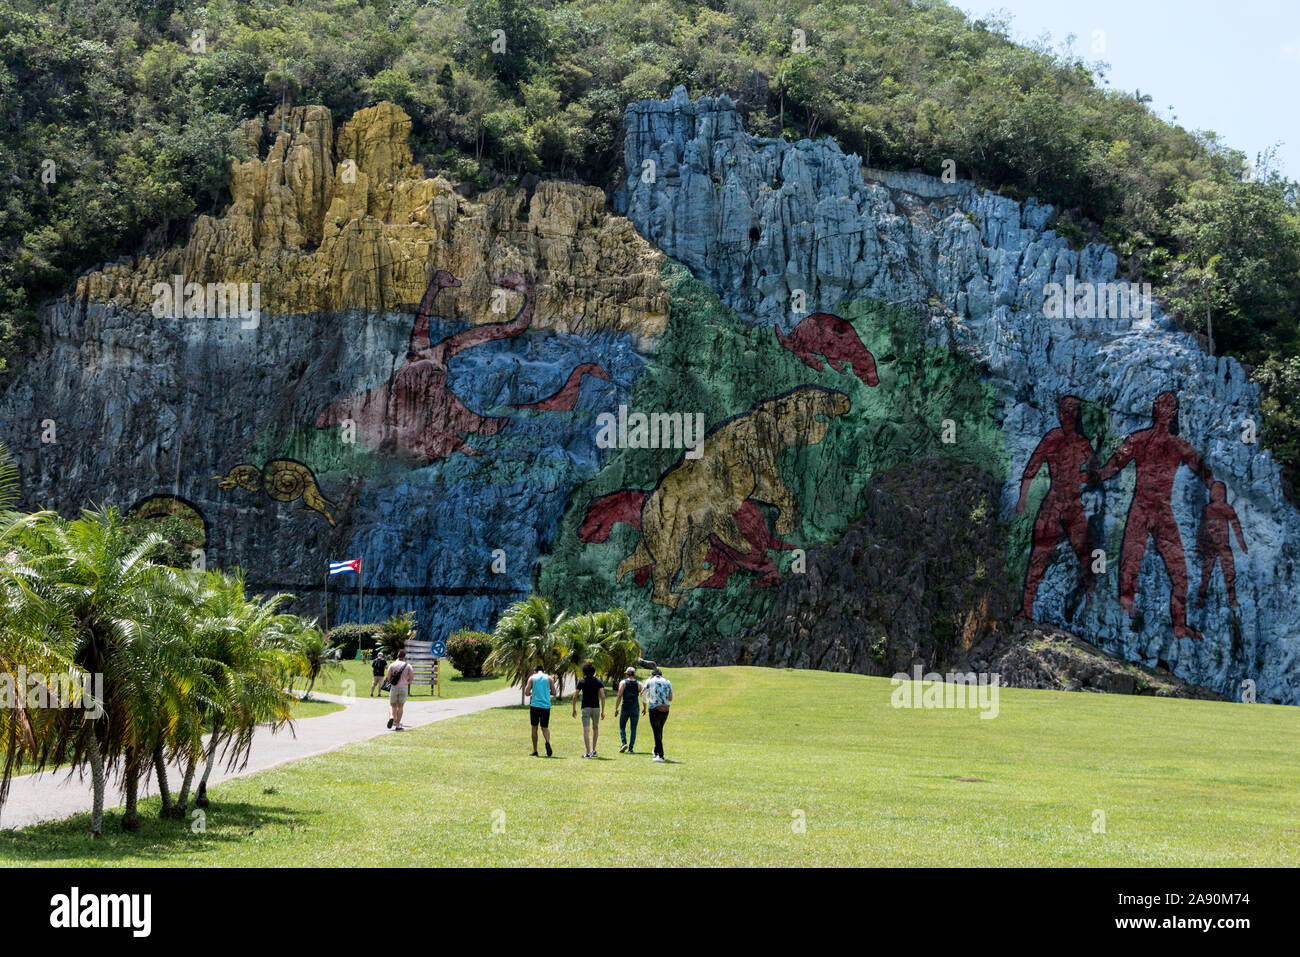 The Mural of Prehistory covering a cliff face at the Restaurant Mural de la Prehistoria, Dos Hermanas near the town of Vinales, in the Pinar del Río P Stock Photo